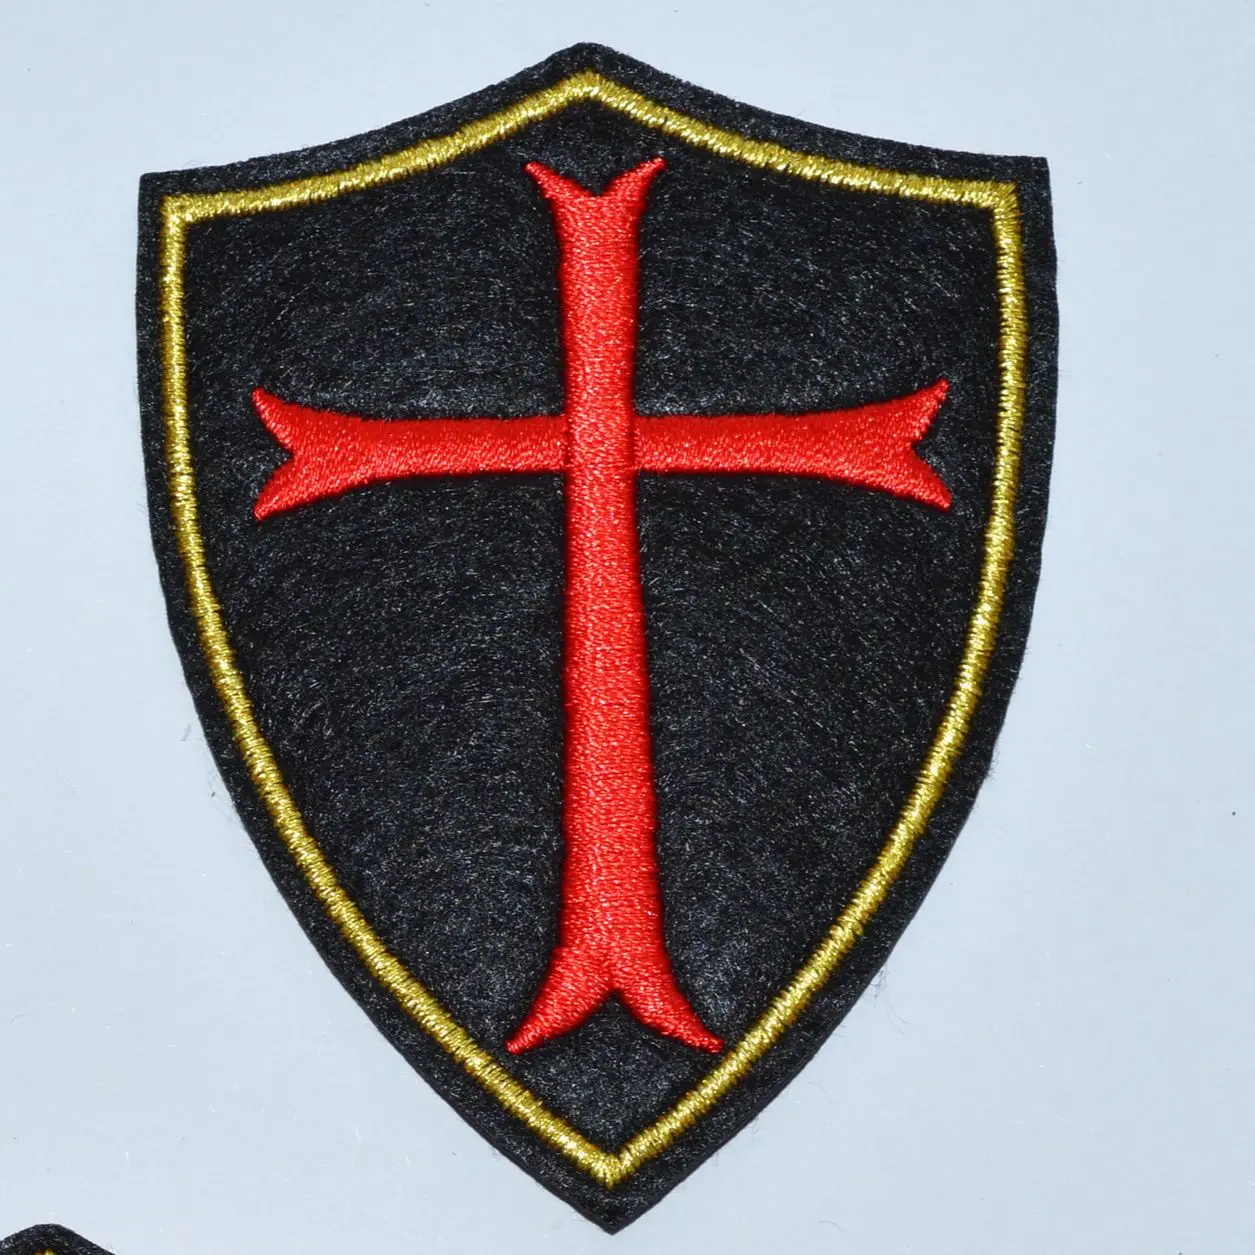 

120x Knights Templar Shield - Cross - Christian Iron On Patches, sew on patch,Appliques, Made of Cloth,100% Quality